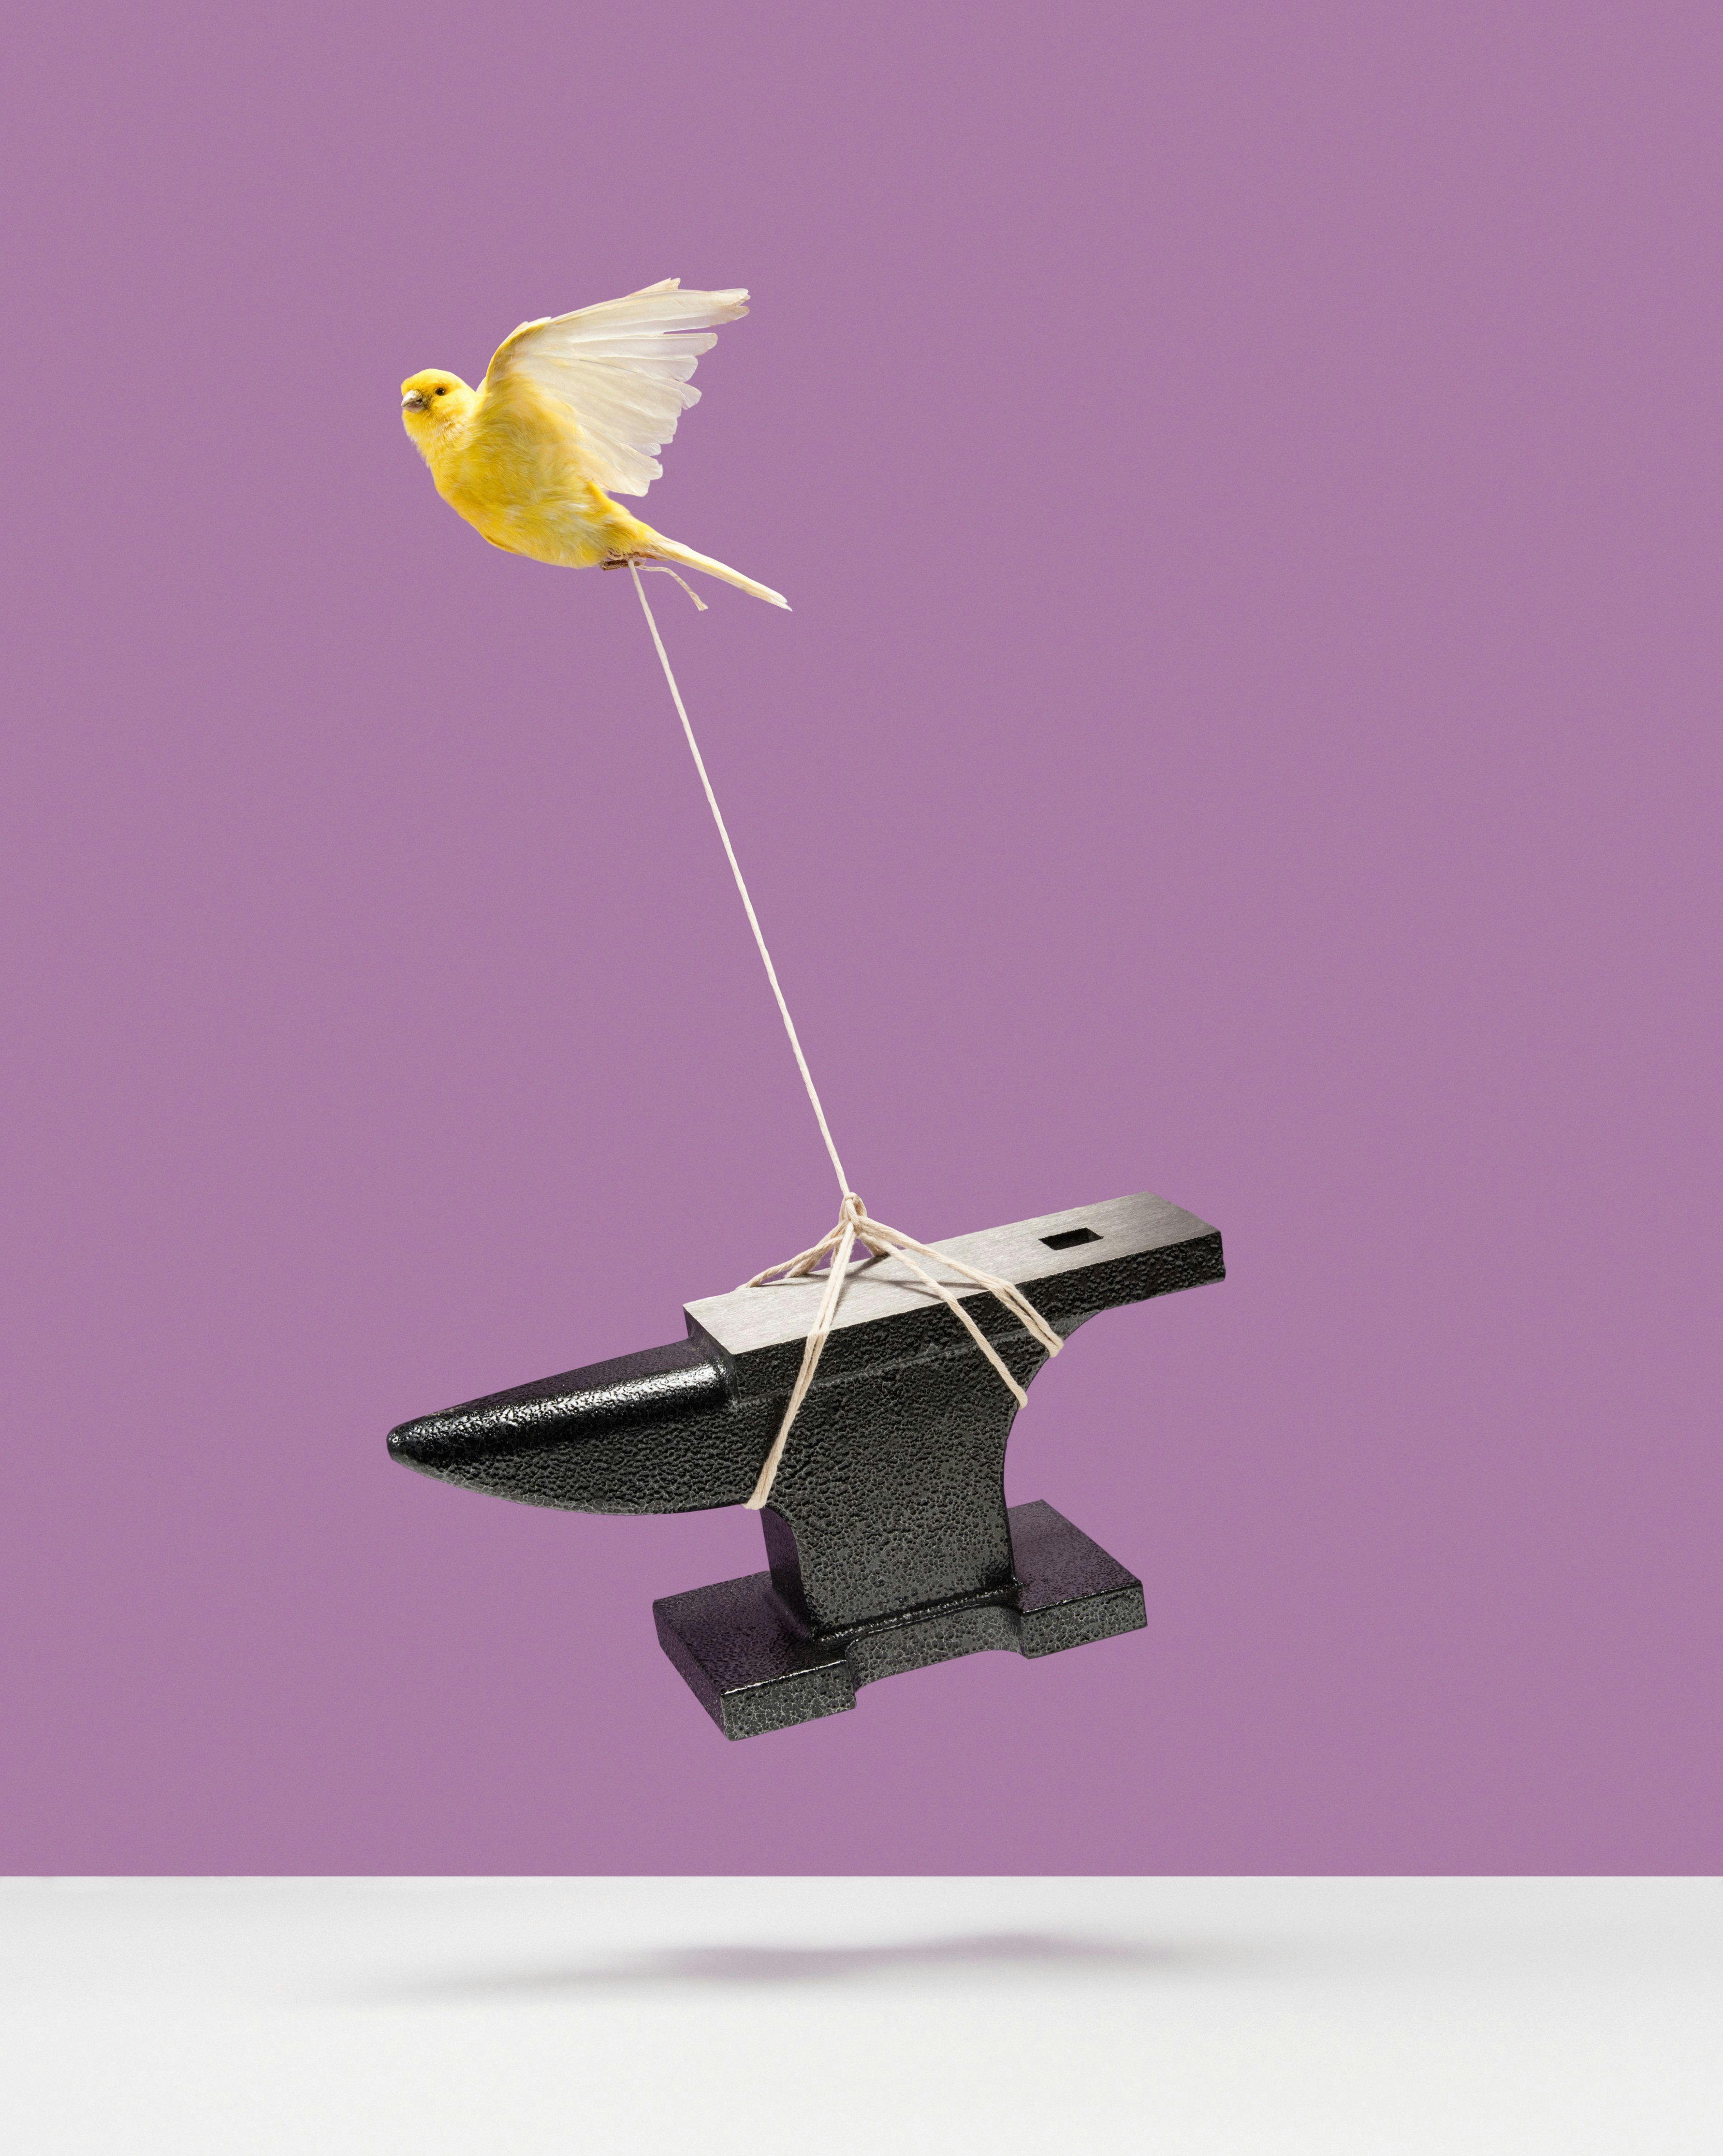 A yellow bird tied to an anvil